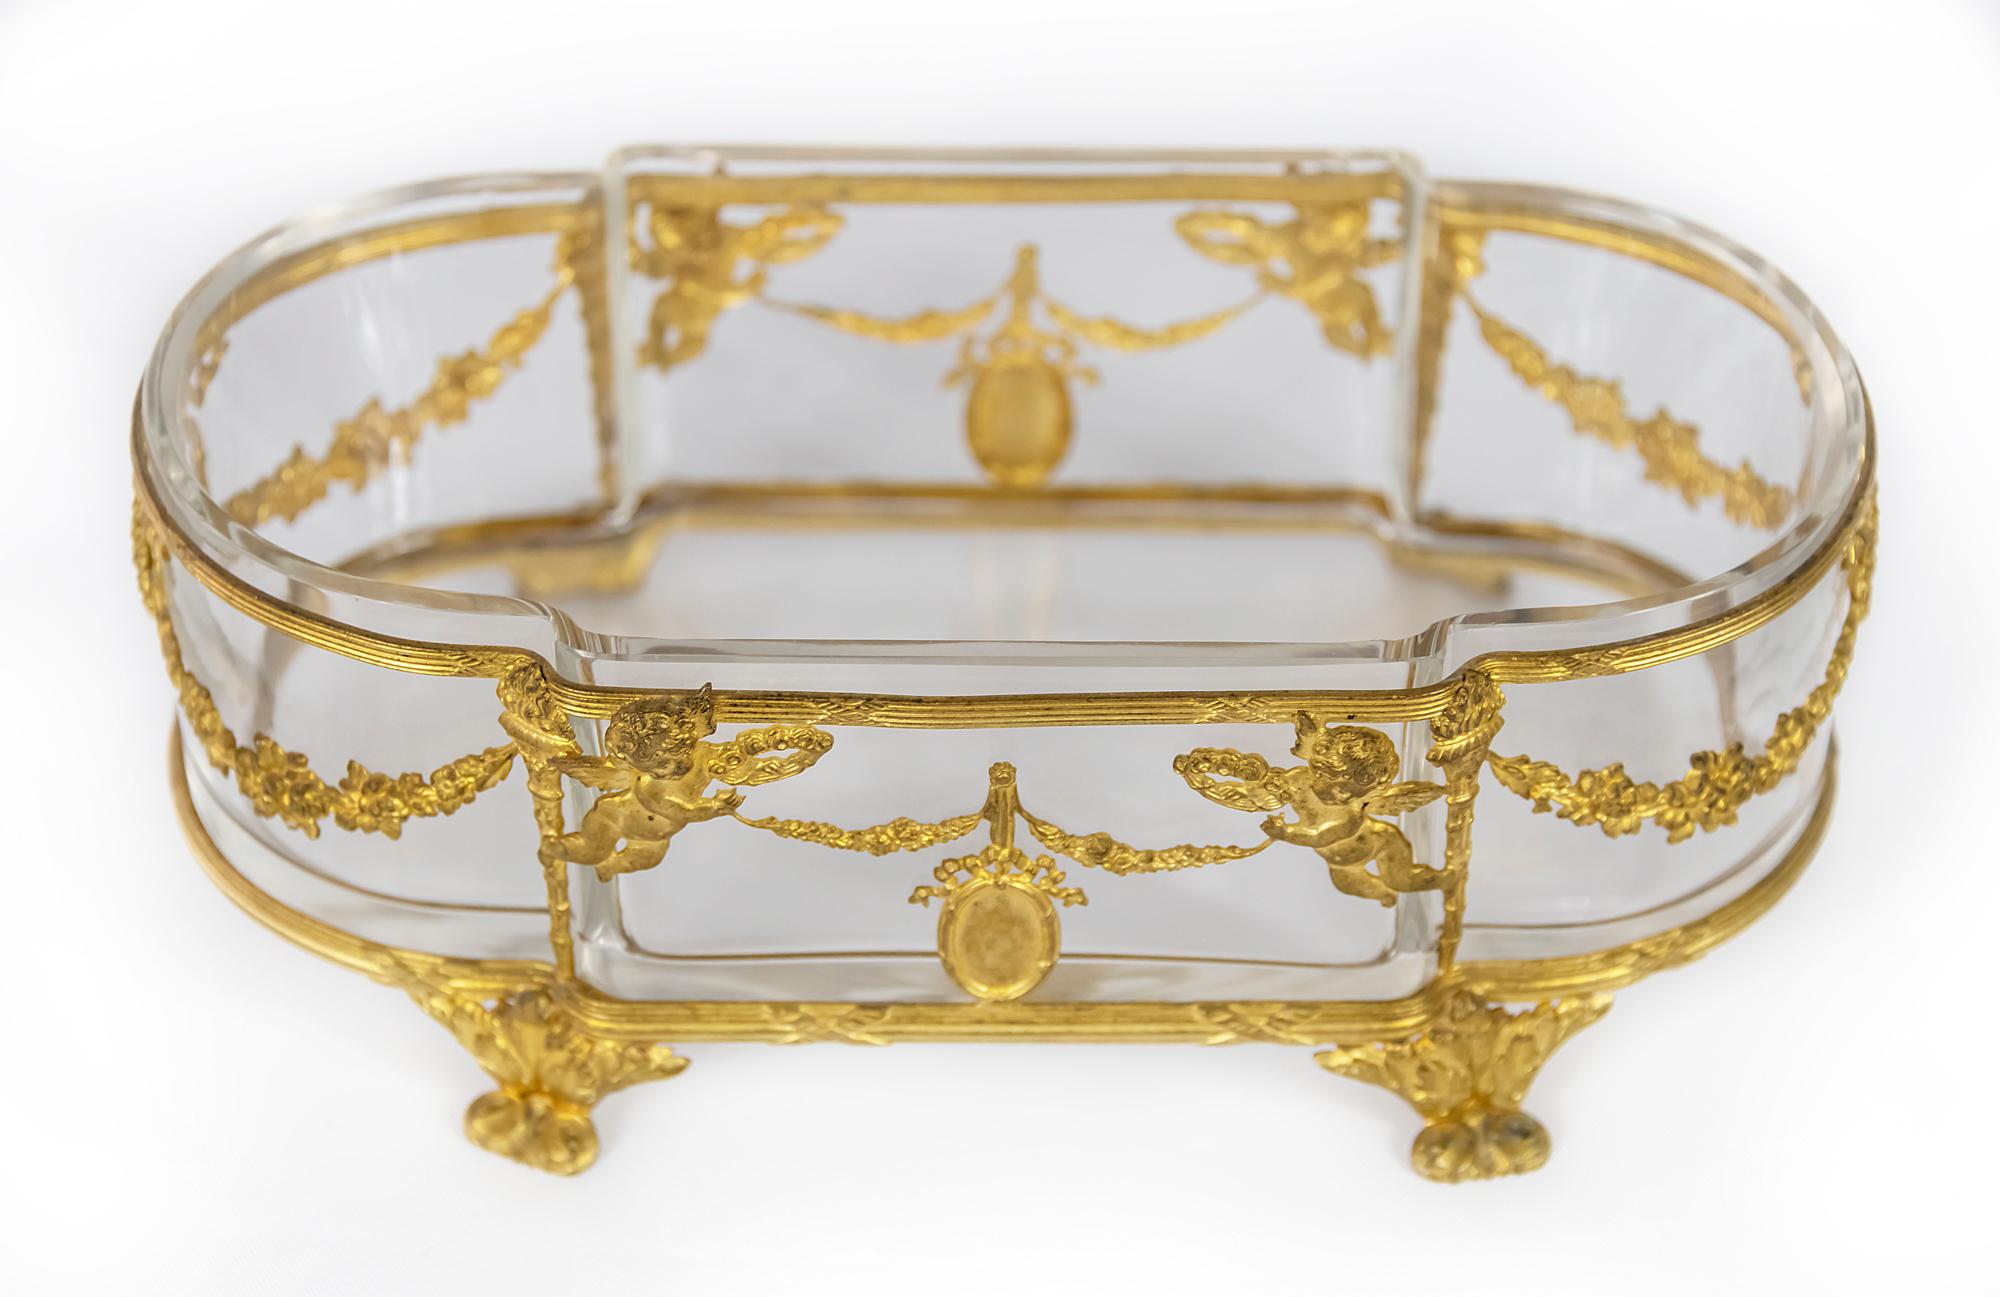 Antique 19th century French gilded bronze and glass dish.
The glass is decorated with gilded bronze decor.